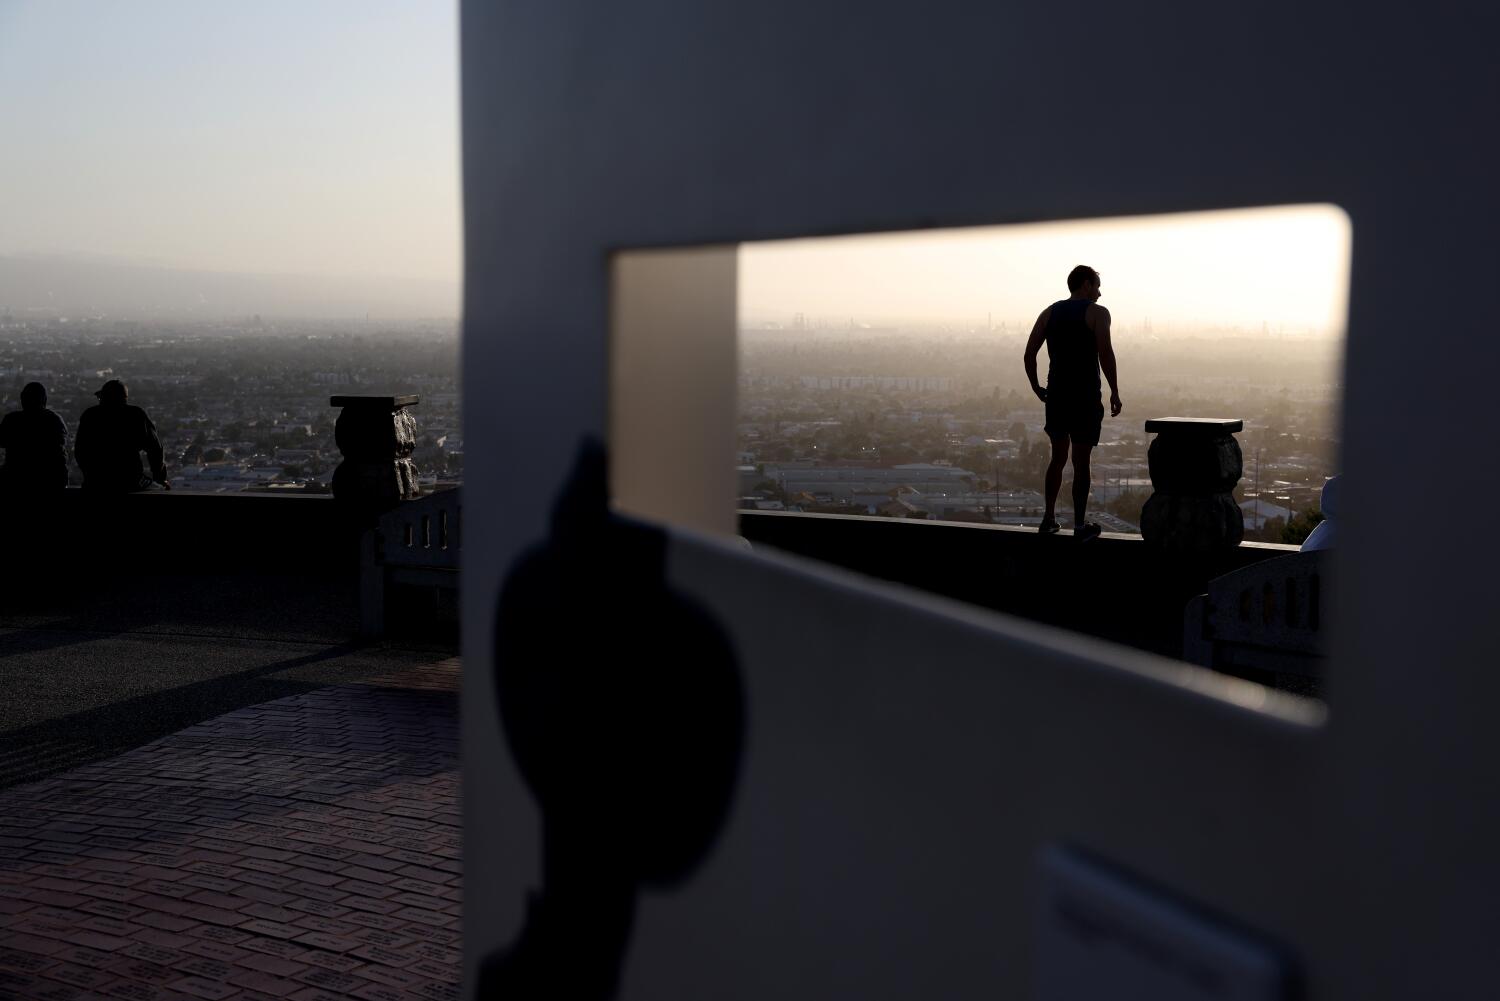 Extended California heat wave brings extreme health, fire risk; power shutoffs likely